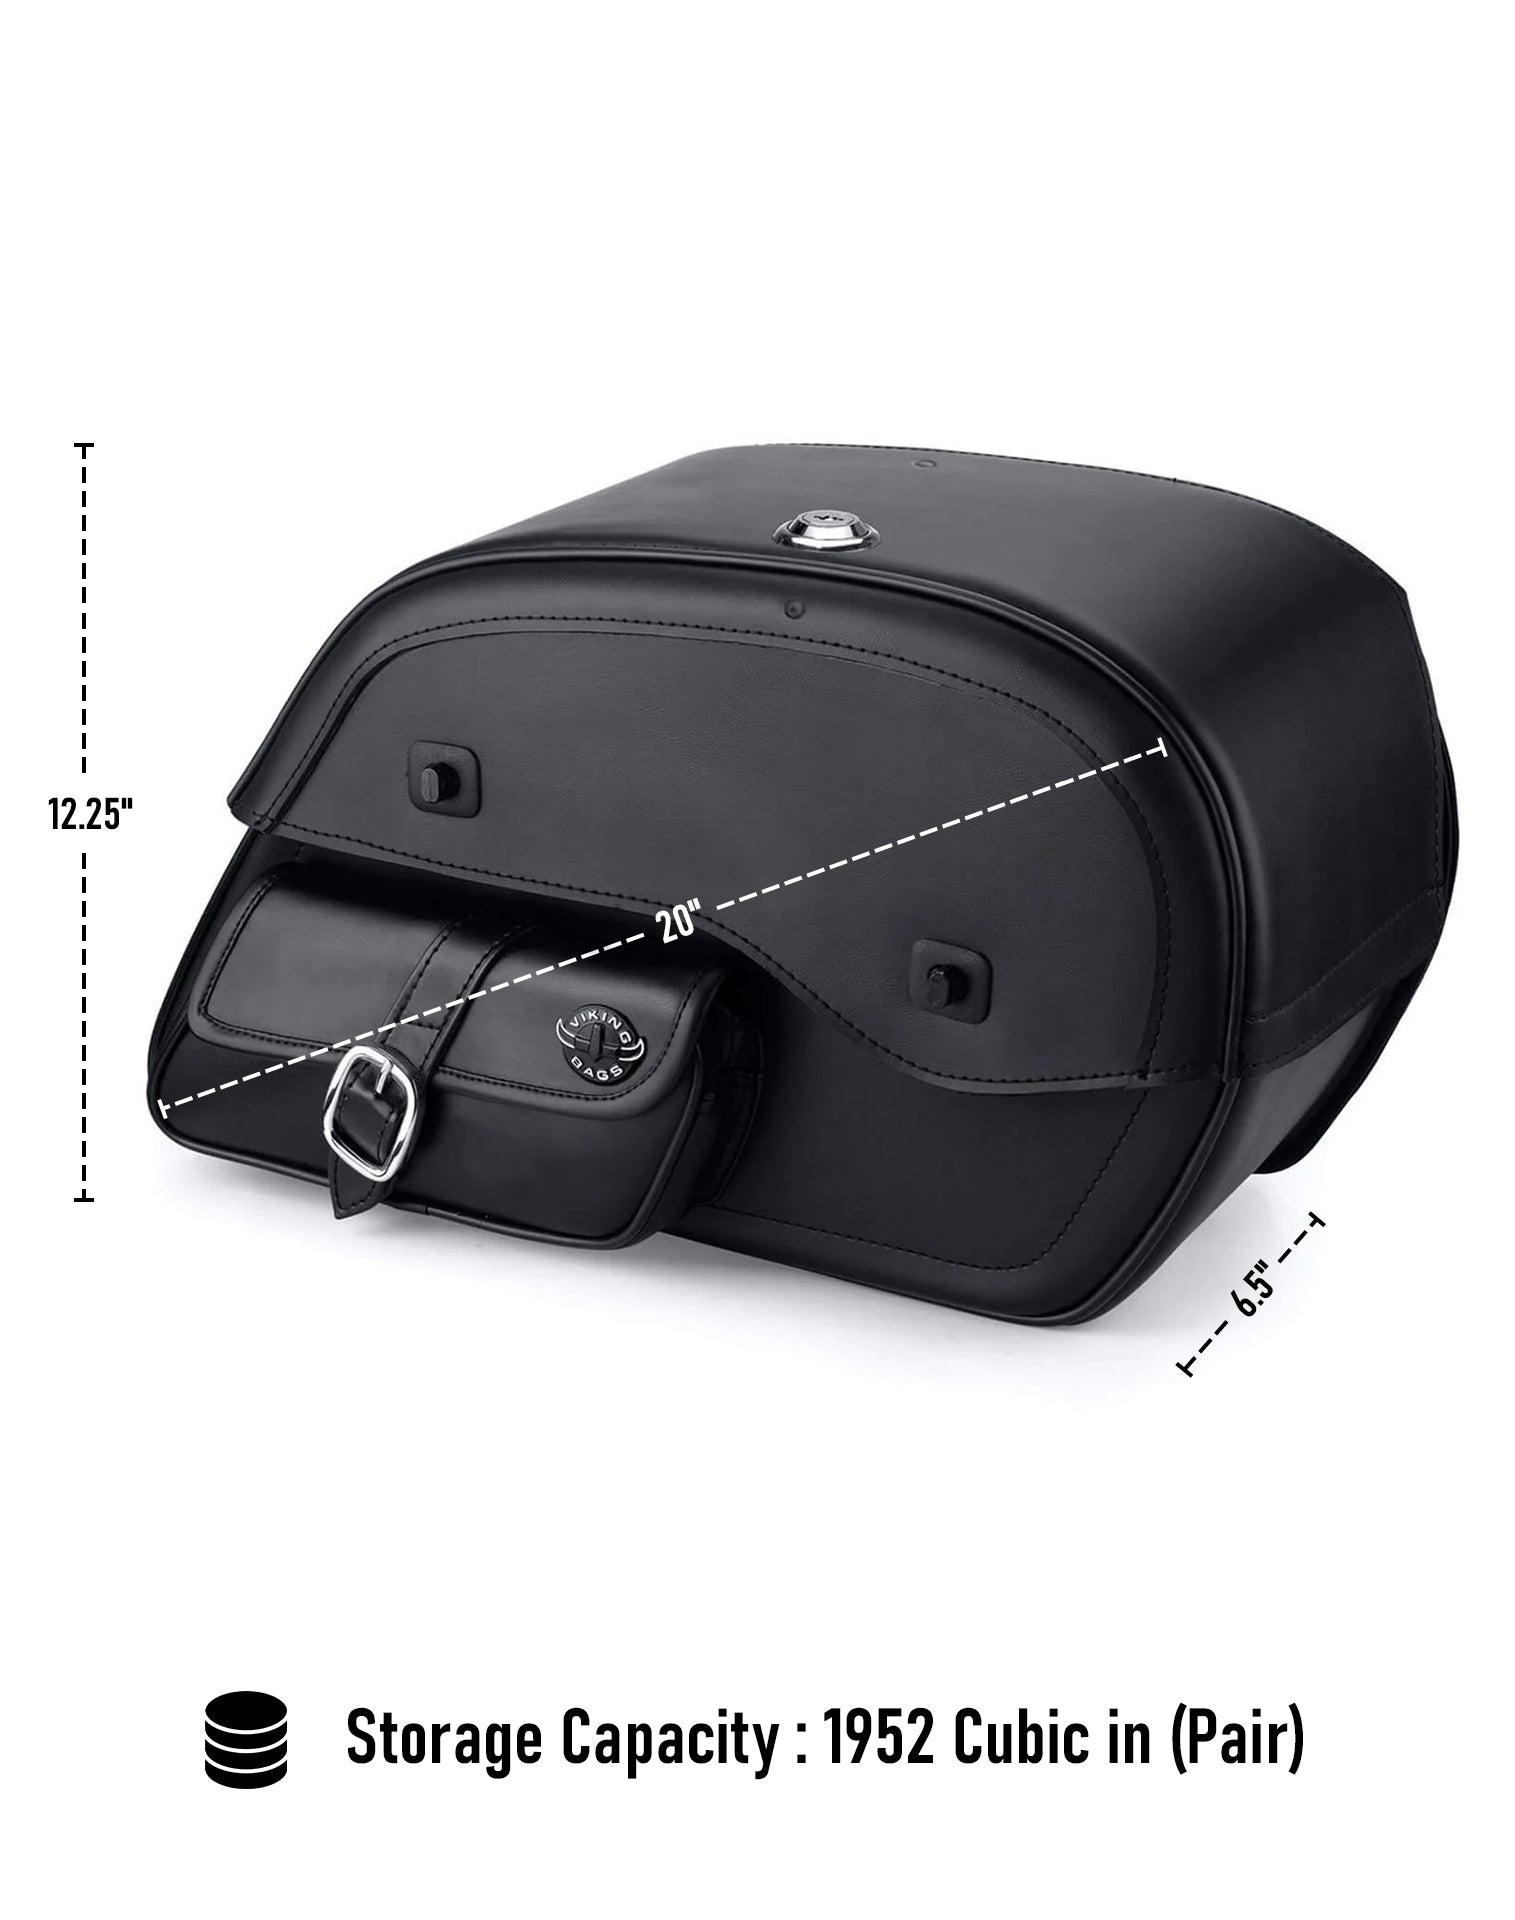 Viking Essential Side Pocket Large Kawasaki Vulcan 900 Custom Leather Motorcycle Saddlebags Can Store Your Ridings Gears